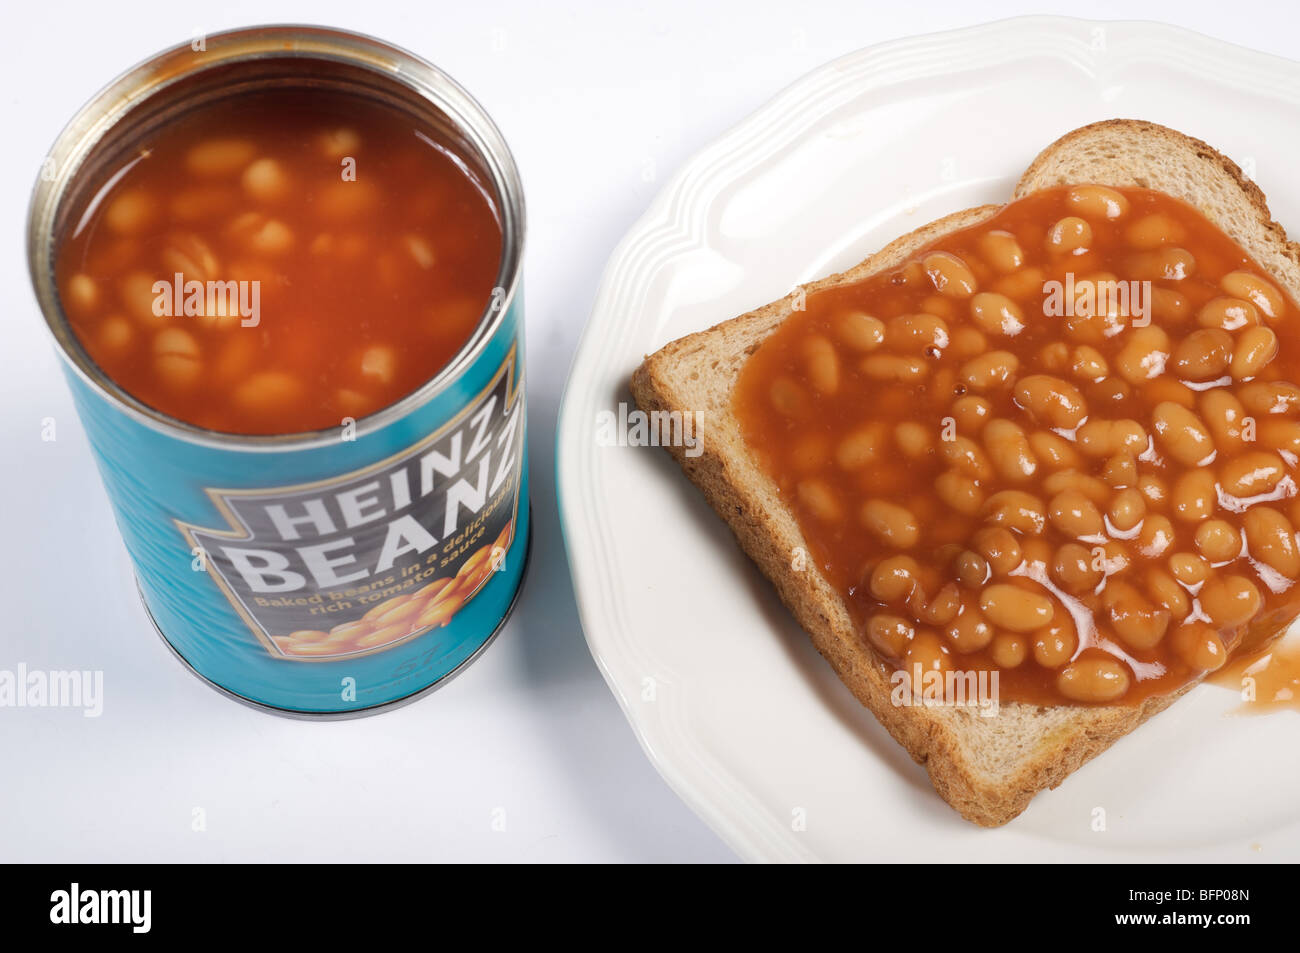 Heinz baked beans on toast, a traditional snack food in Great Britain Stock Photo